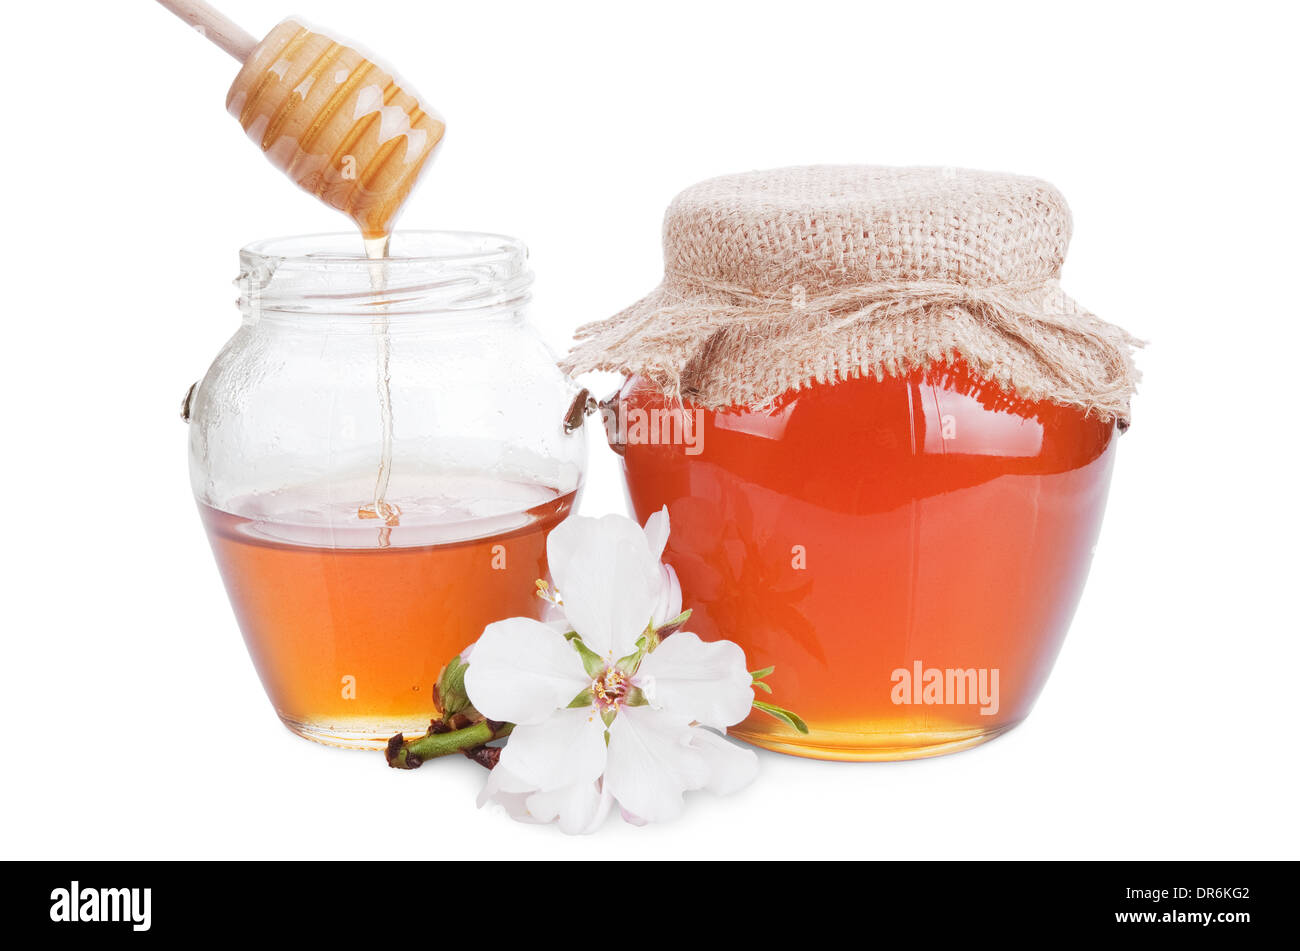 glass jars with honey and wooden stick isolated on white background Stock Photo